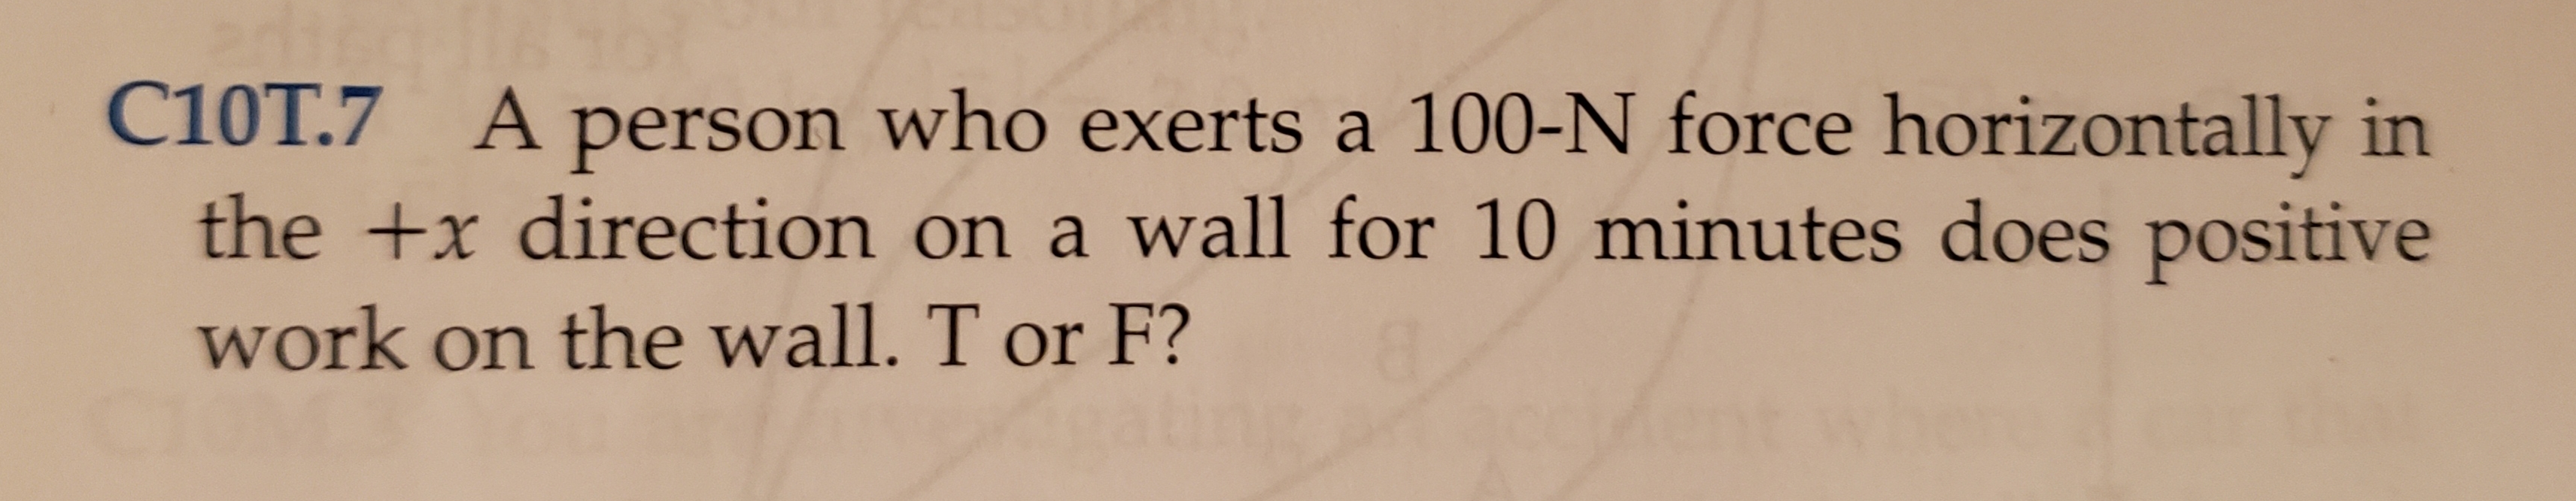 C10T.7 Aperson who exerts a 100-N force horizontally in
the +x direction on a wall for 10 minutes does positive
work on the wall. T or F?
